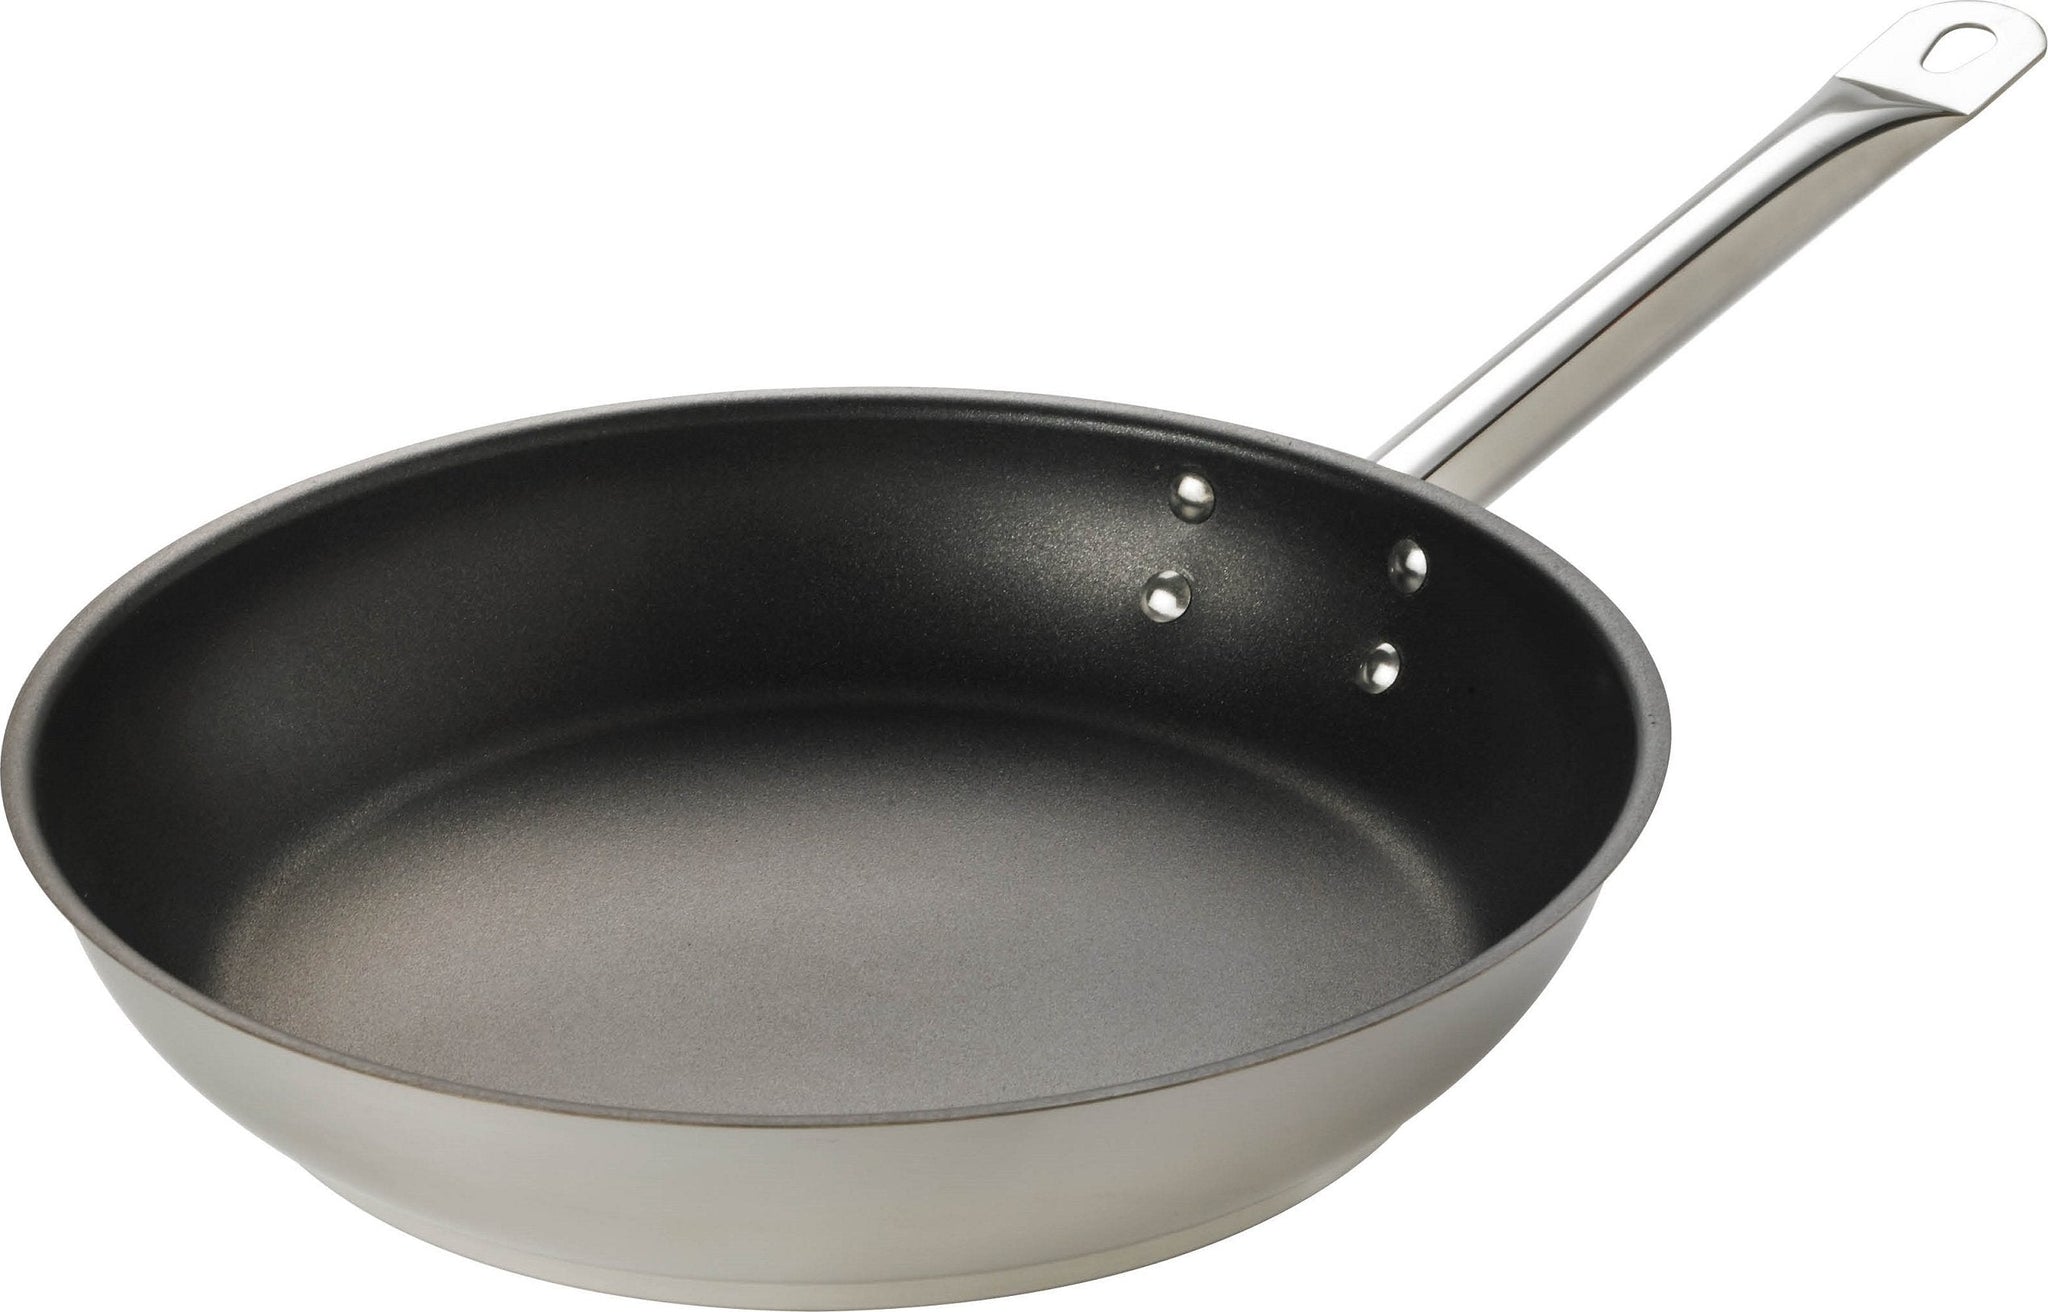 Thermalloy - 11" Stainless Steel Excalibur Non-Stick Fry Pan - 573777